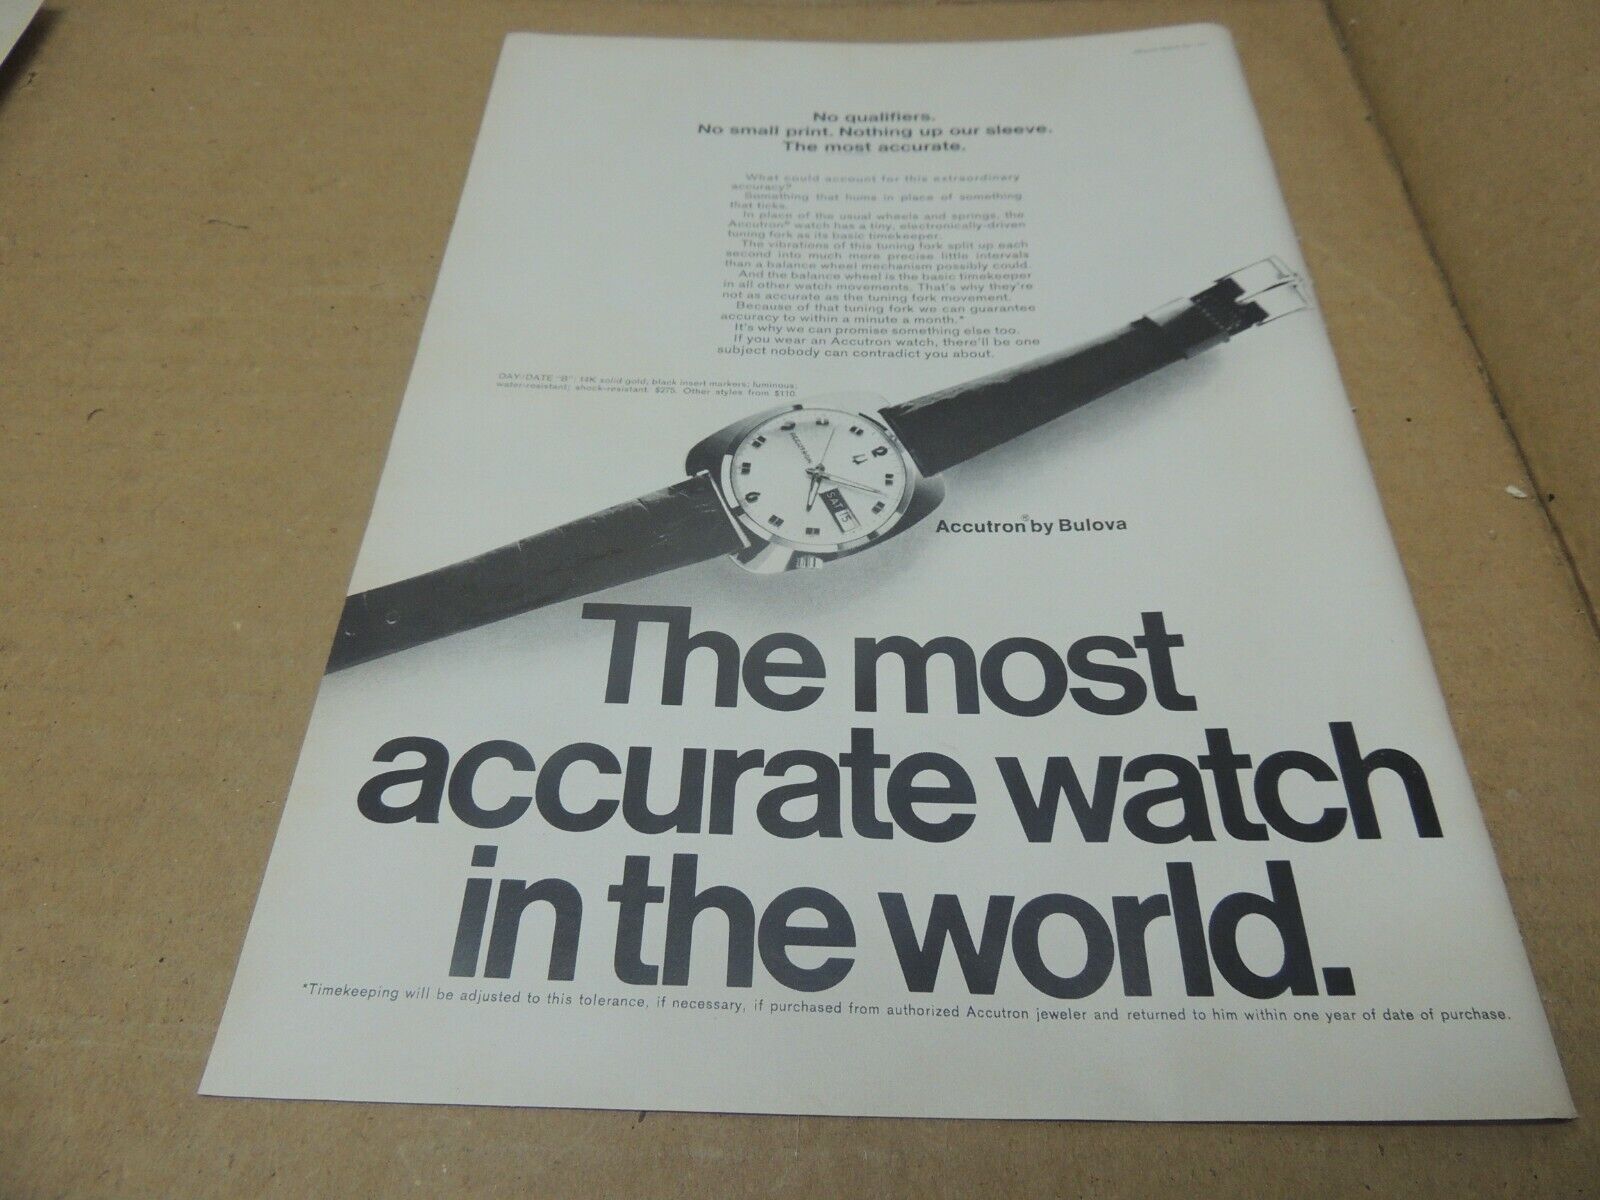 Accutron by Bulova Watch 1969 Original Print Ad The most accurate watch in world